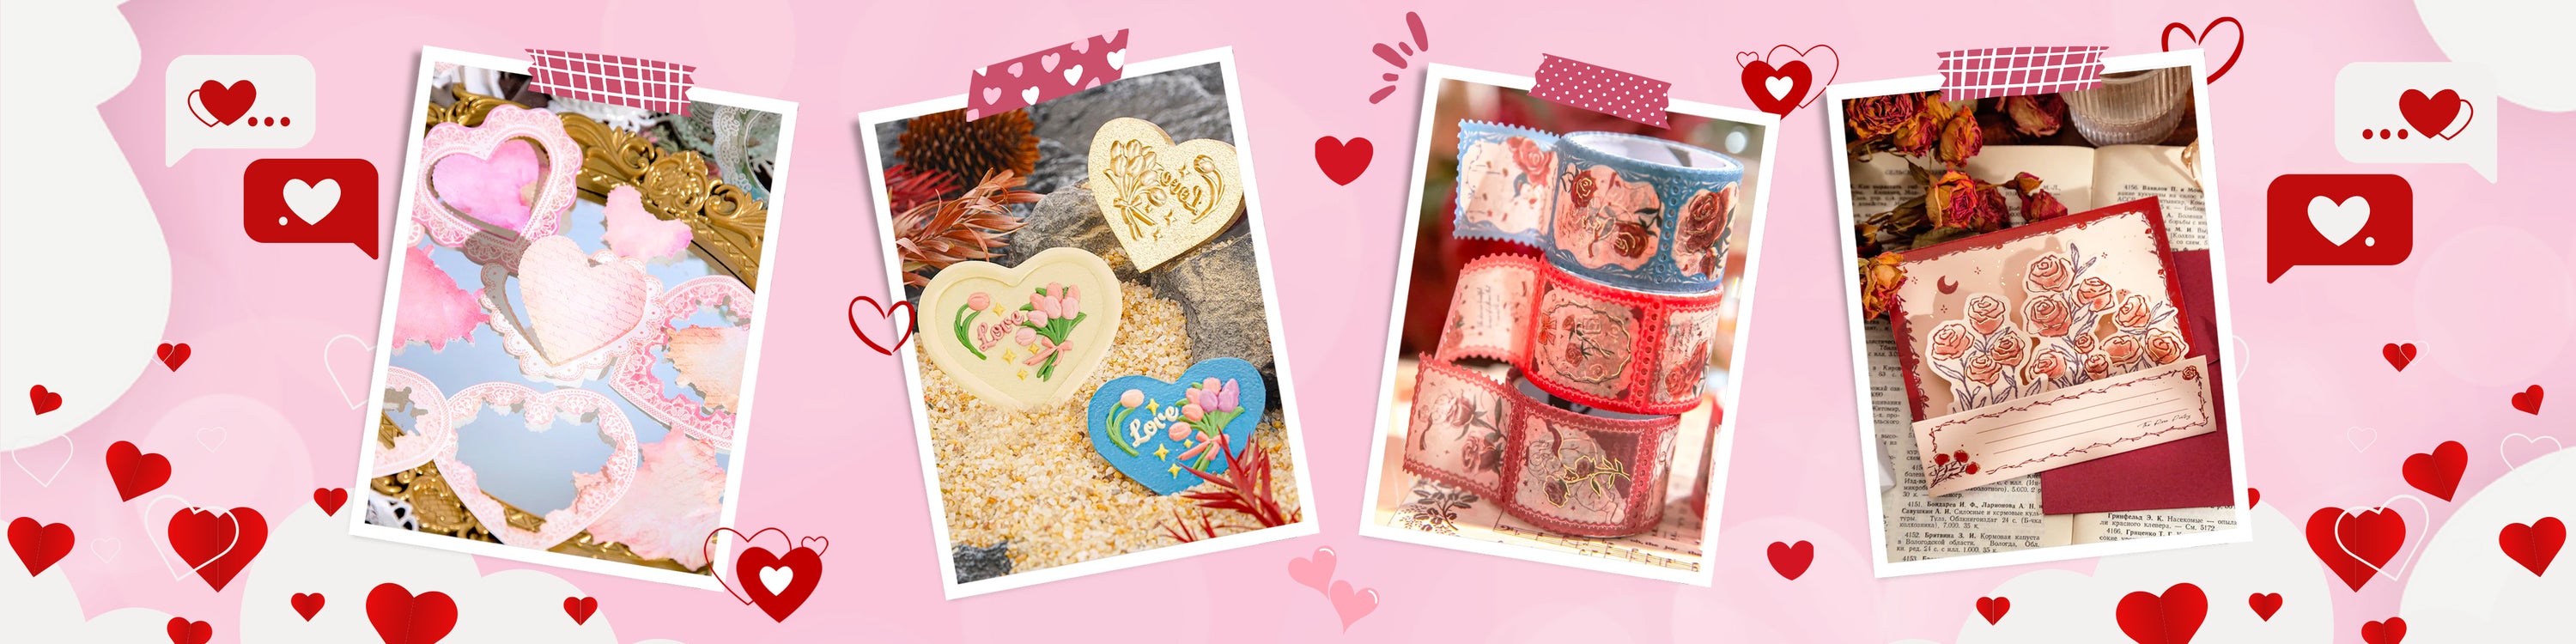 These washi tapes, stickers, greeting cards, envelopes, and notebooks are the perfect gift to express your love.